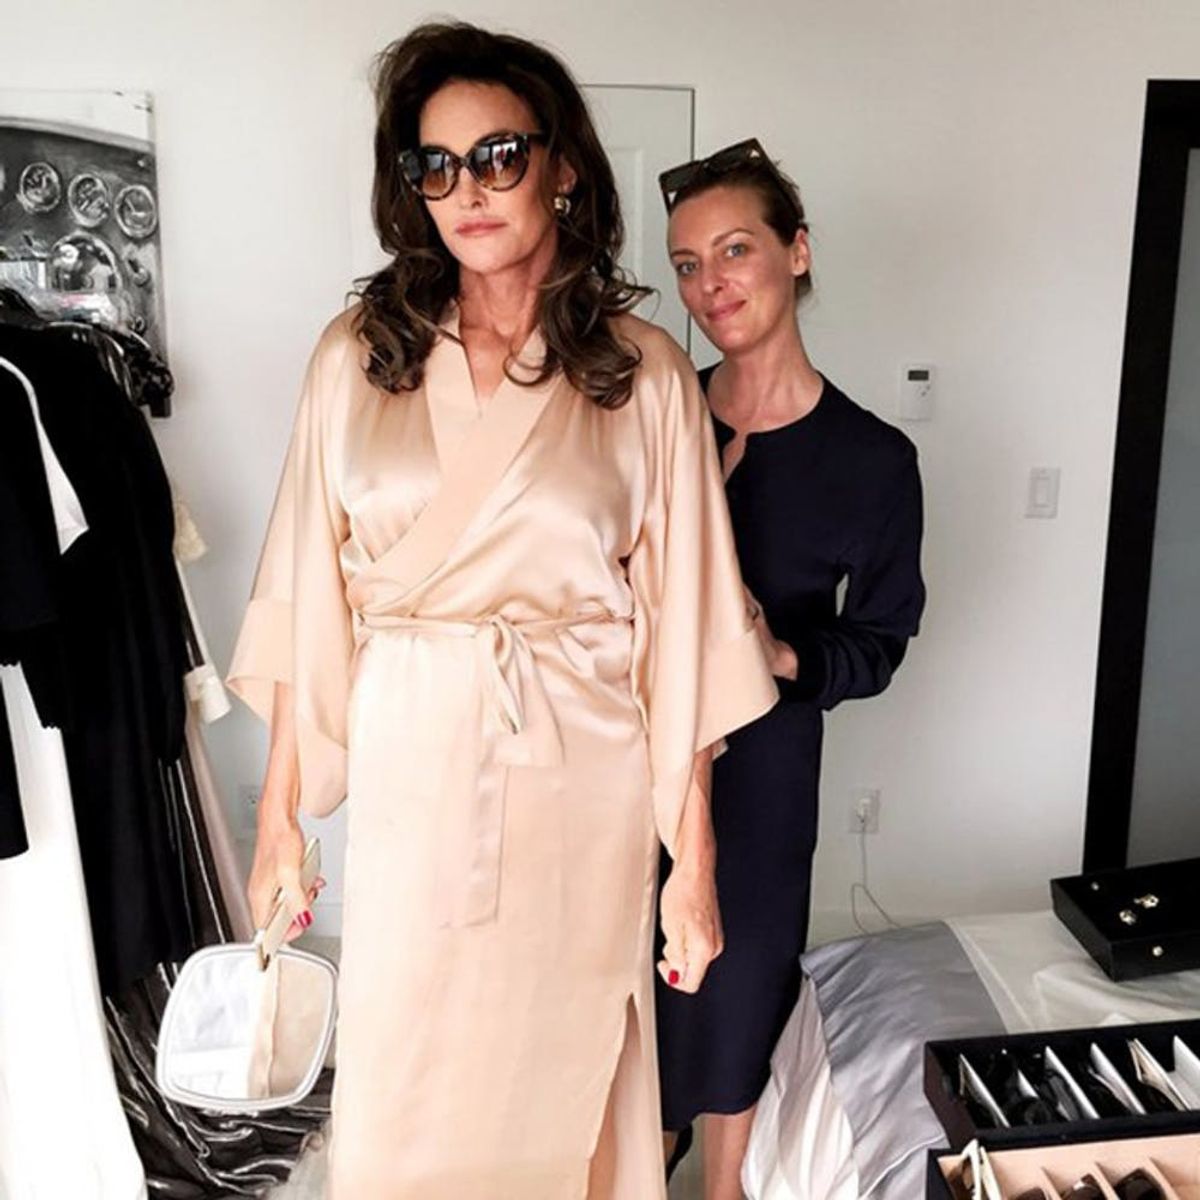 This Is the Story of How Caitlyn Jenner Chose Her Non-K Name